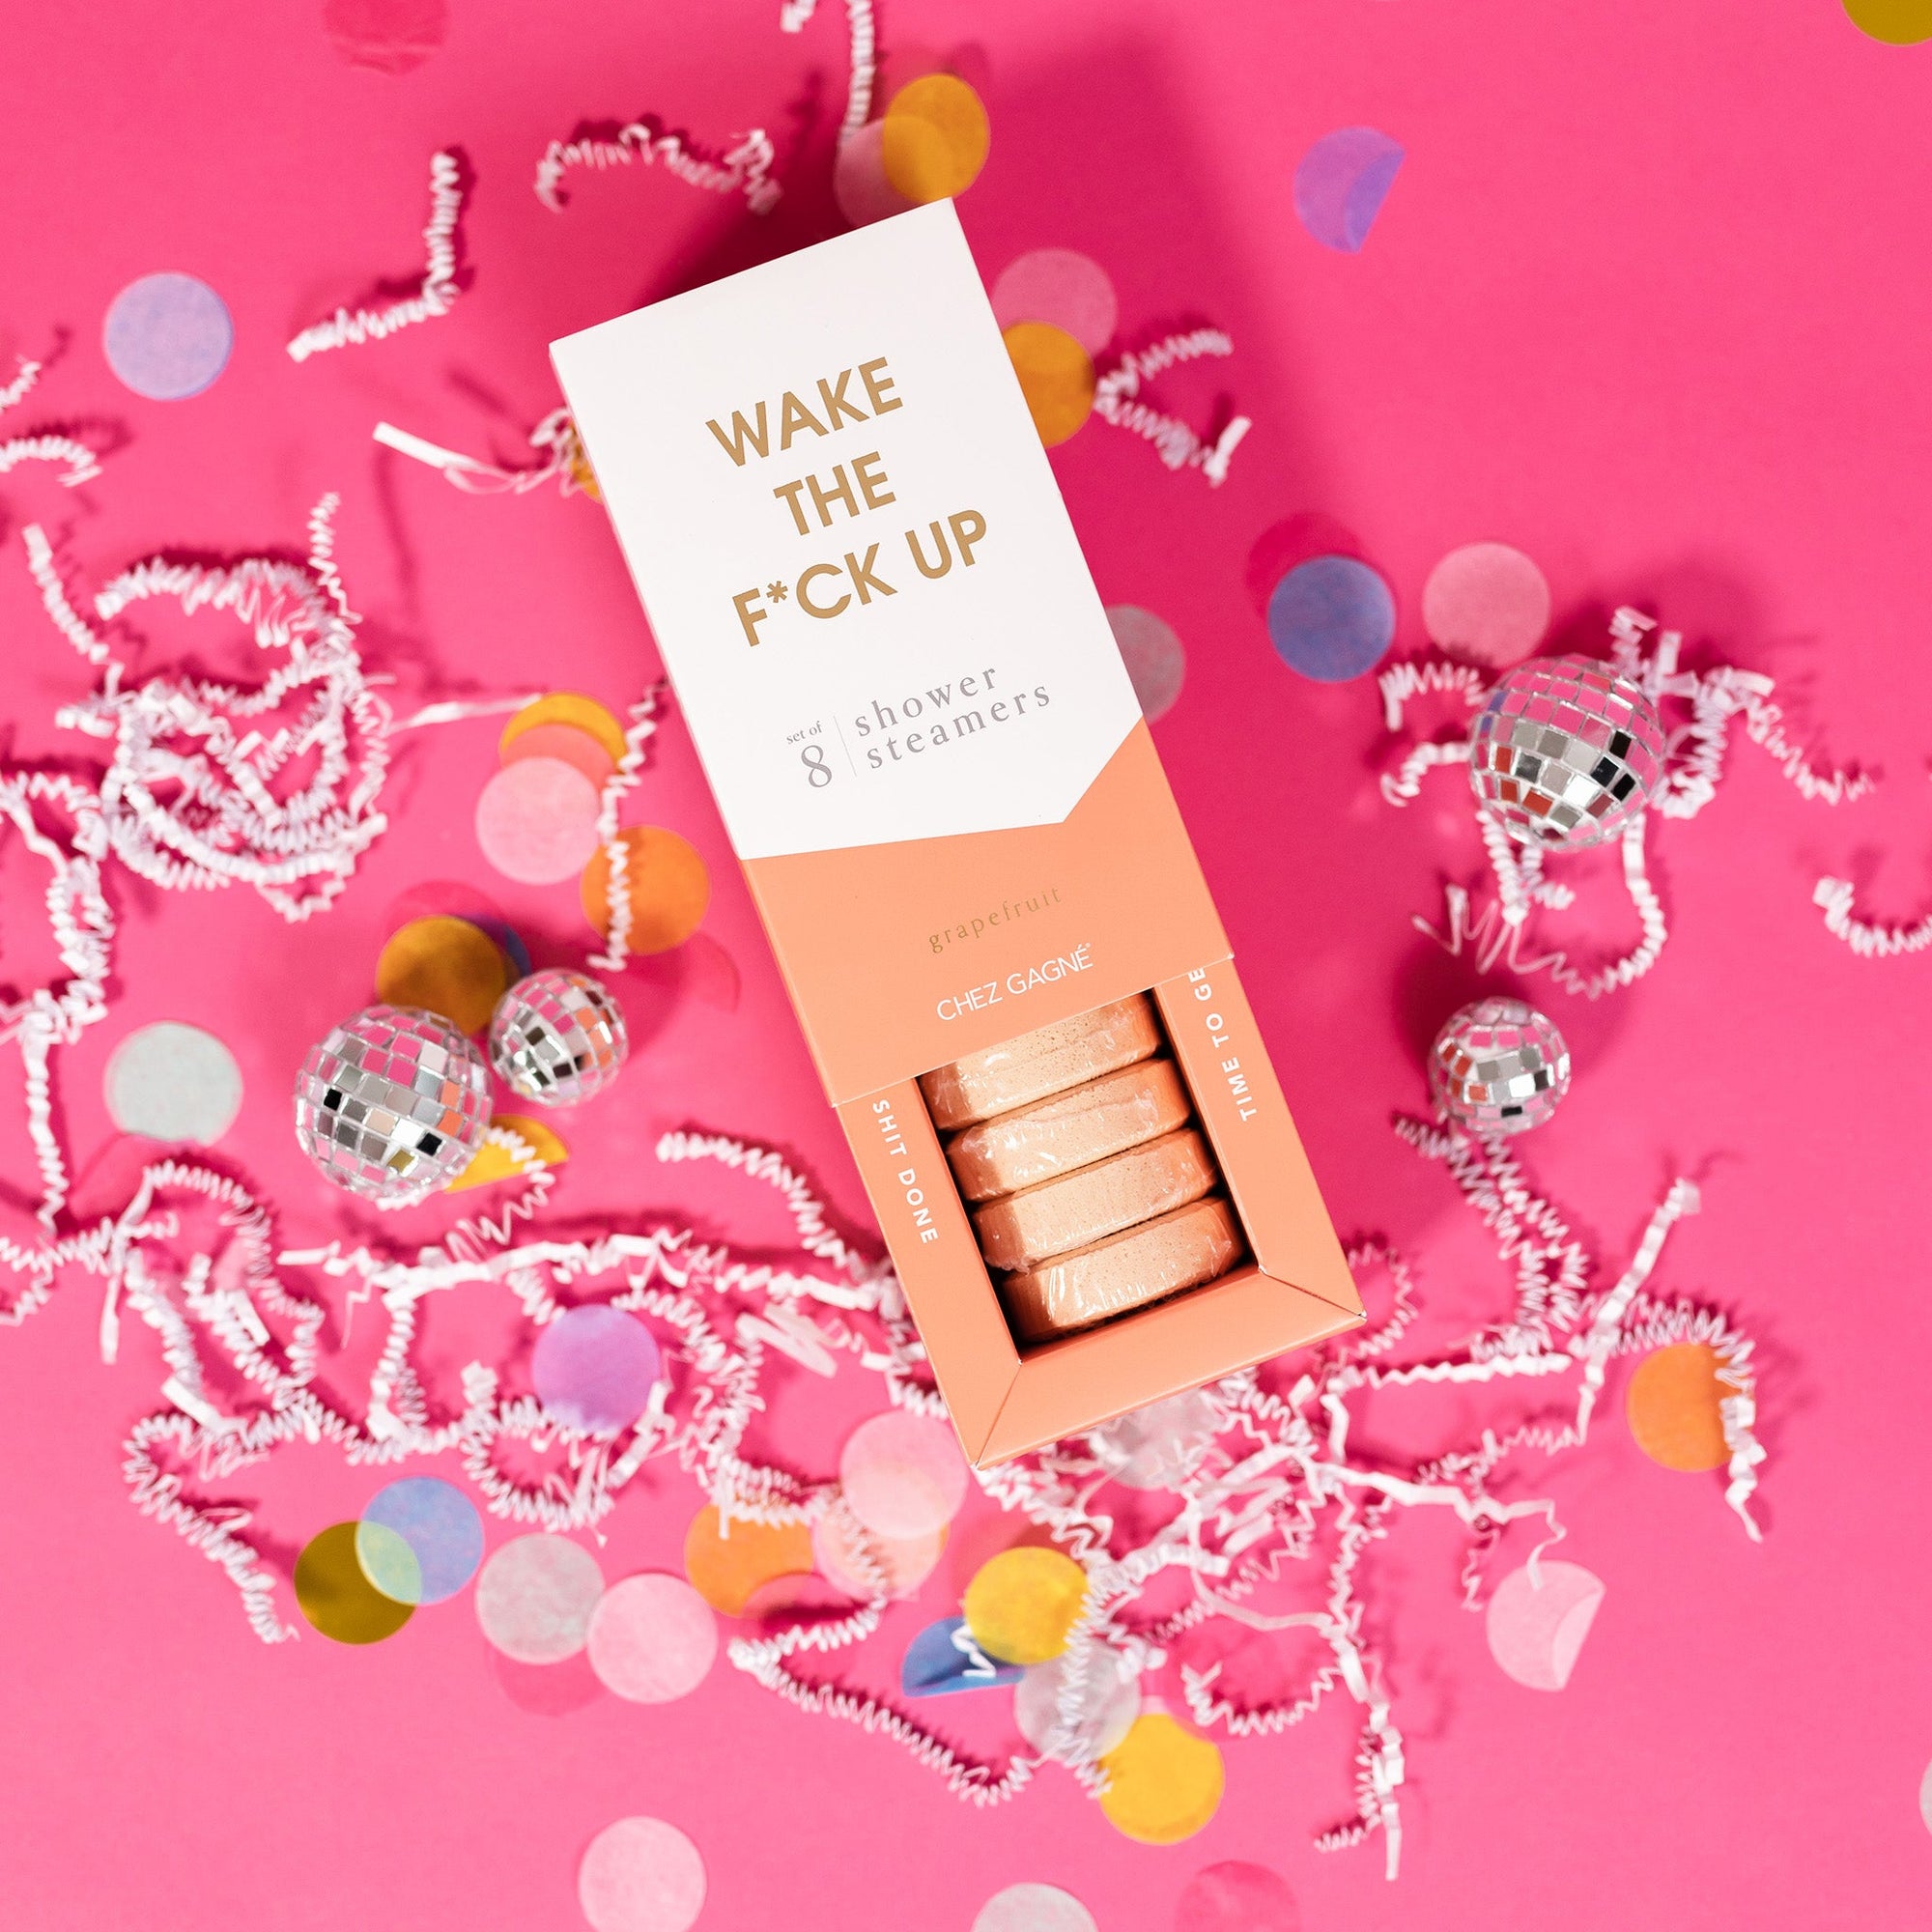 On a hot pink background sits an opened box with white crinkle and big, colorful confetti scattered around. There are mini disco balls. This picture is a close-up of a white and light pink package that says "WAKE THE F*CK UP" in gold foil, all caps block lettering. Under it says "set of 8" and " shower steamers" in grey, lowercase serif font. At the bottom it says "grapefruit" in gold foil, lower case serif font. The box is opened to reveal the peach shower steamers in it.